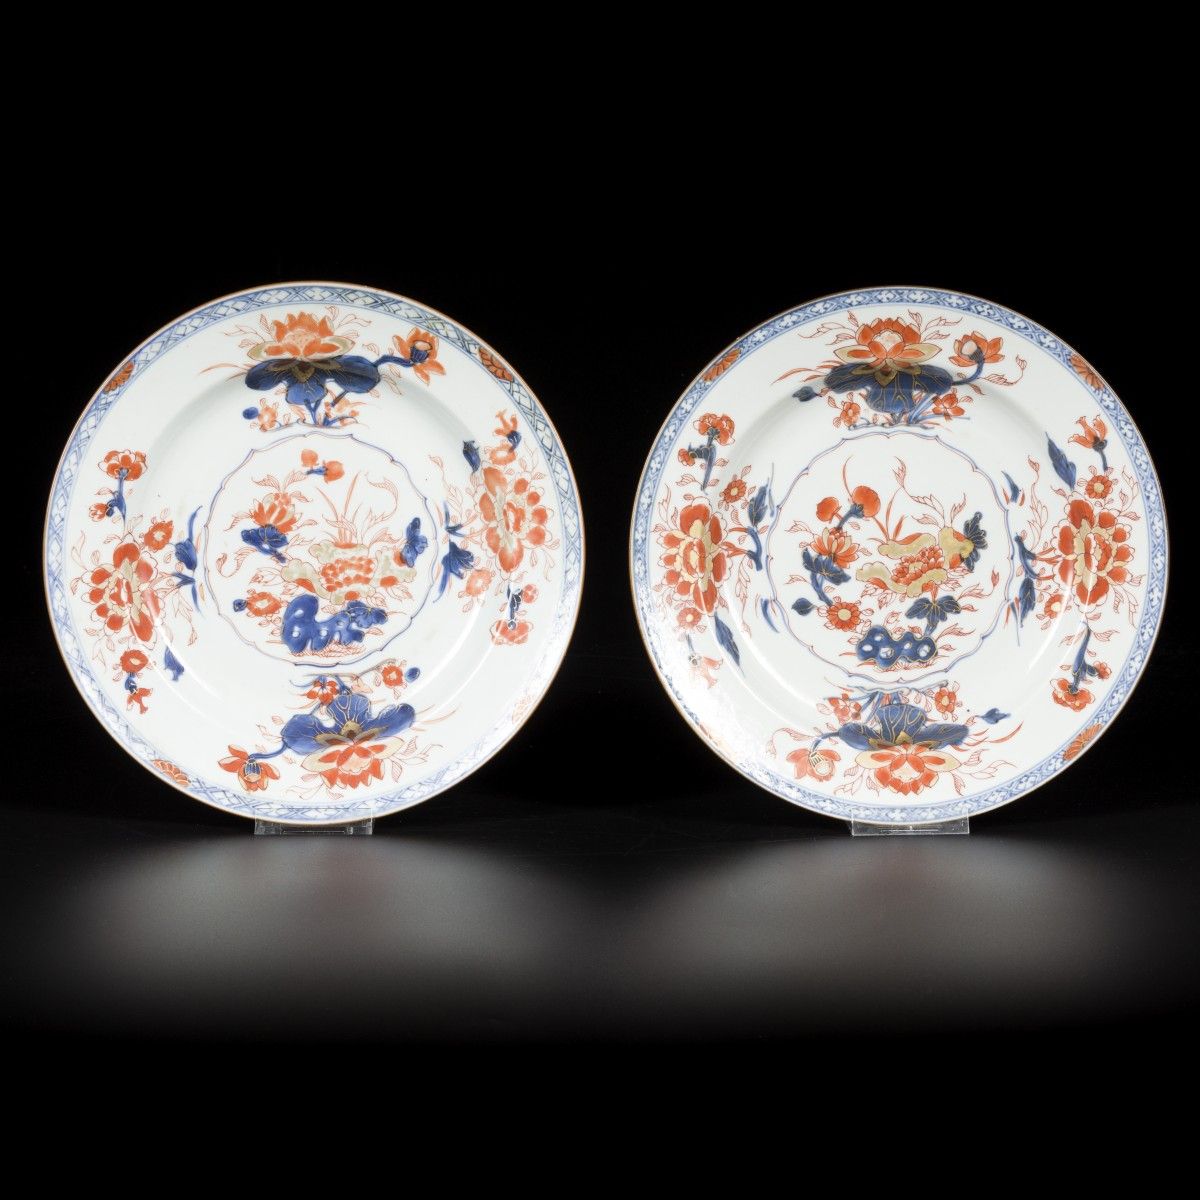 A set of (2) Imari porcelain chargers with floral decoration, China, 18th centur&hellip;